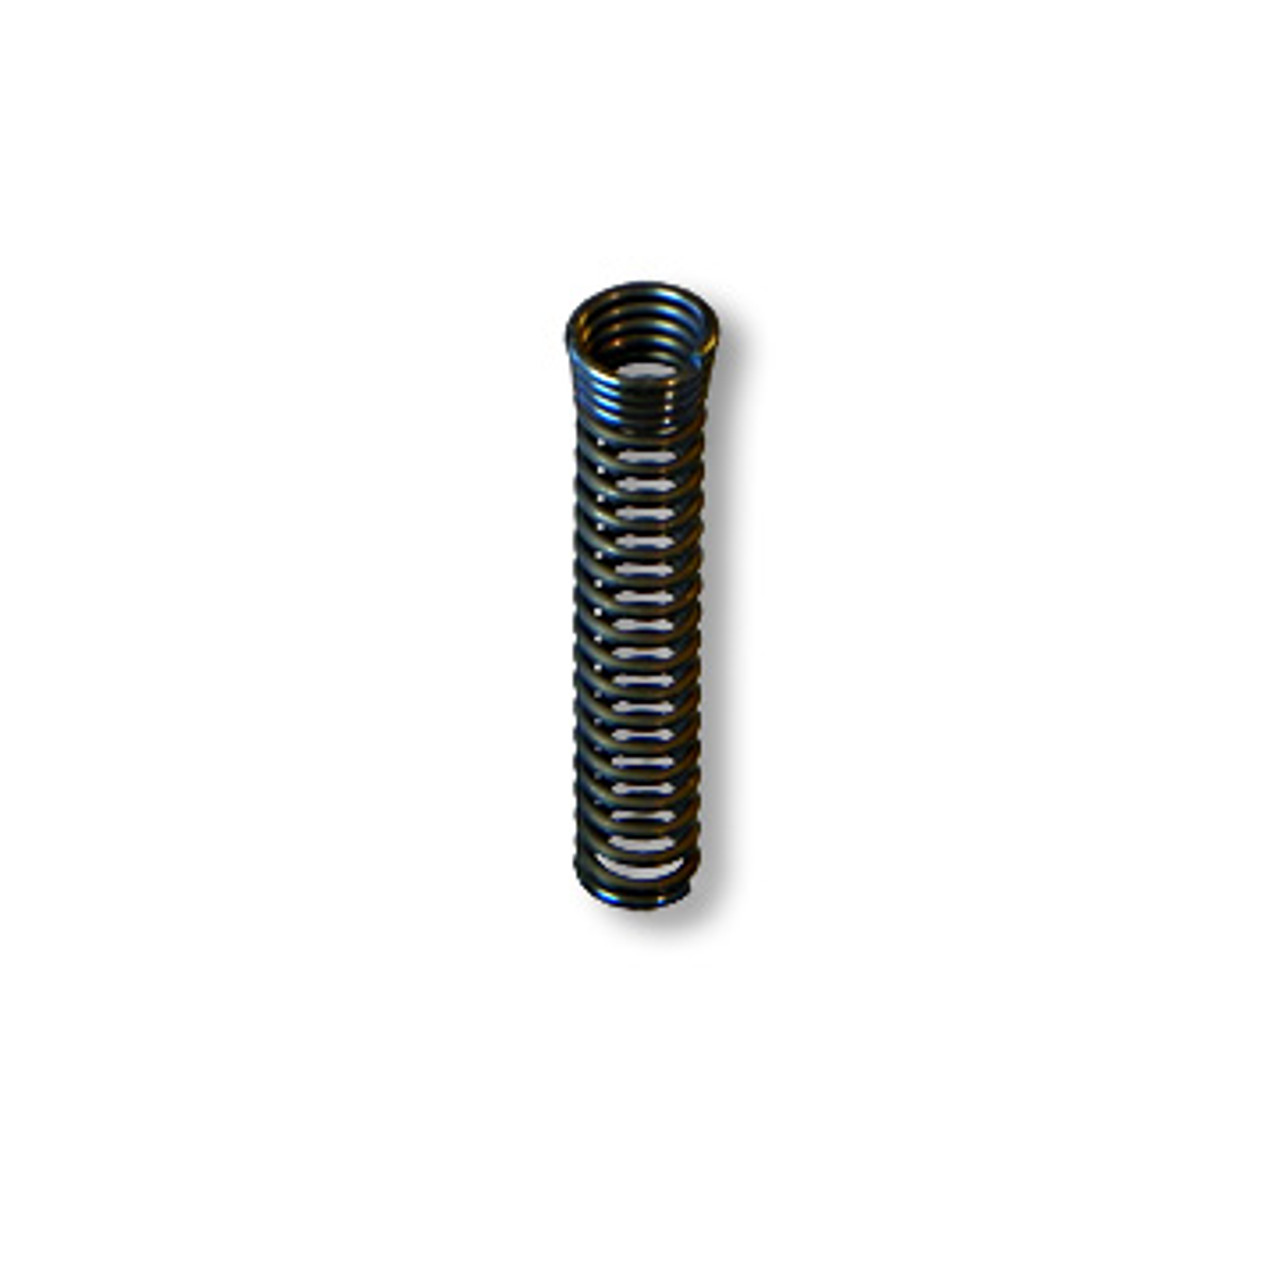 Spring, .350" OD X 1/4" ID X 3" Length For 7/32" Conduit